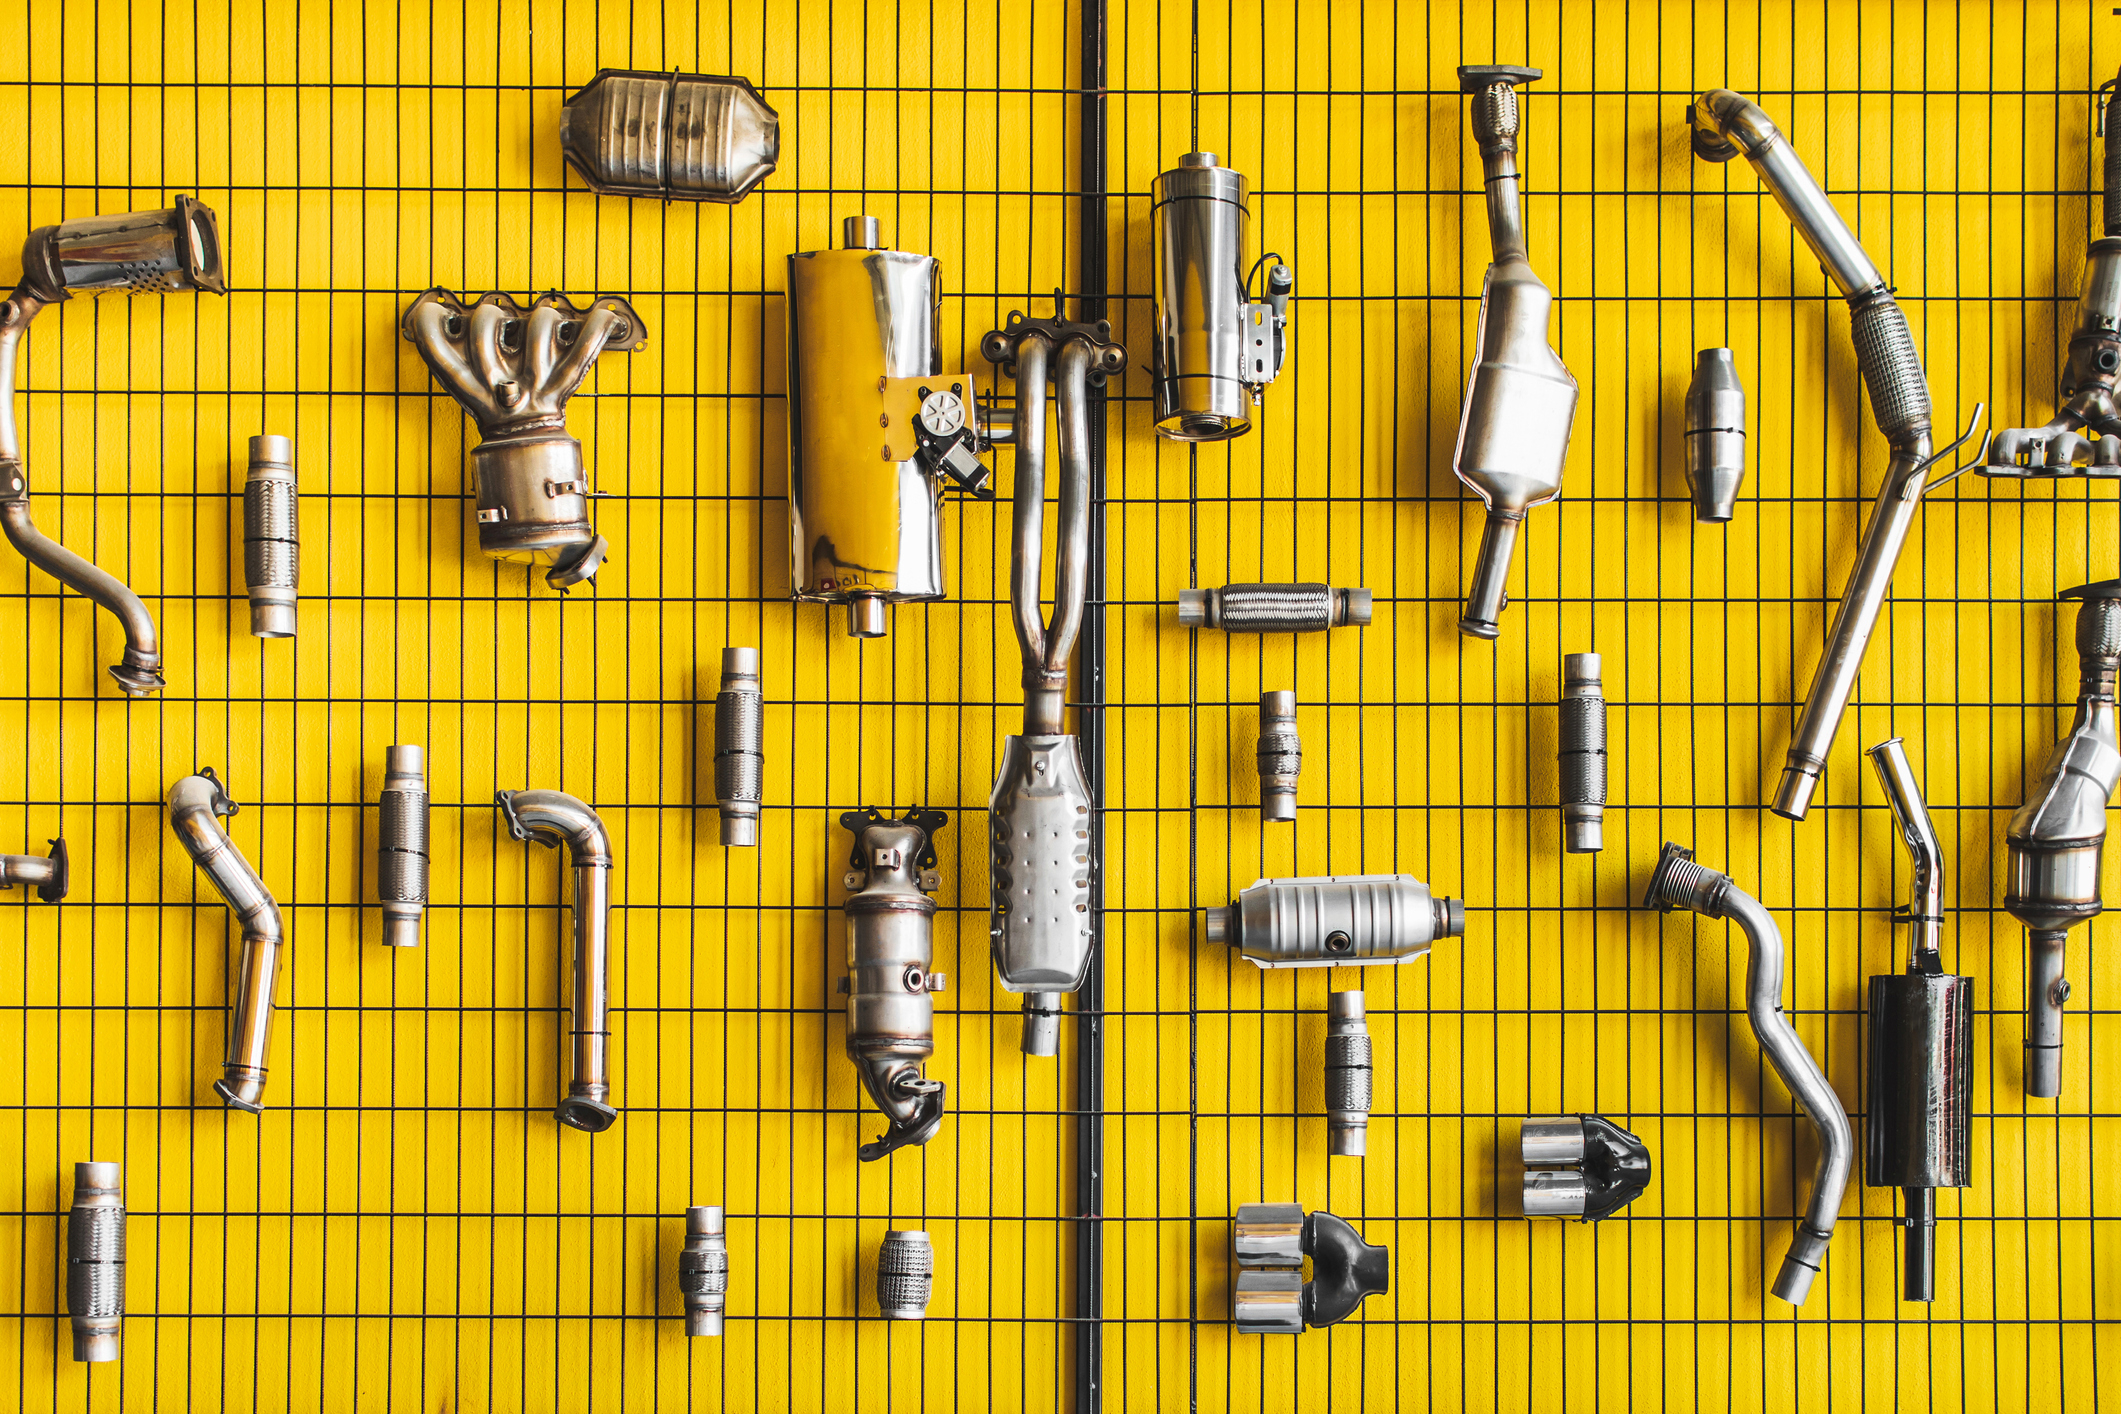 Assorted car exhaust parts displayed in an organized fashion on a yellow grid wall